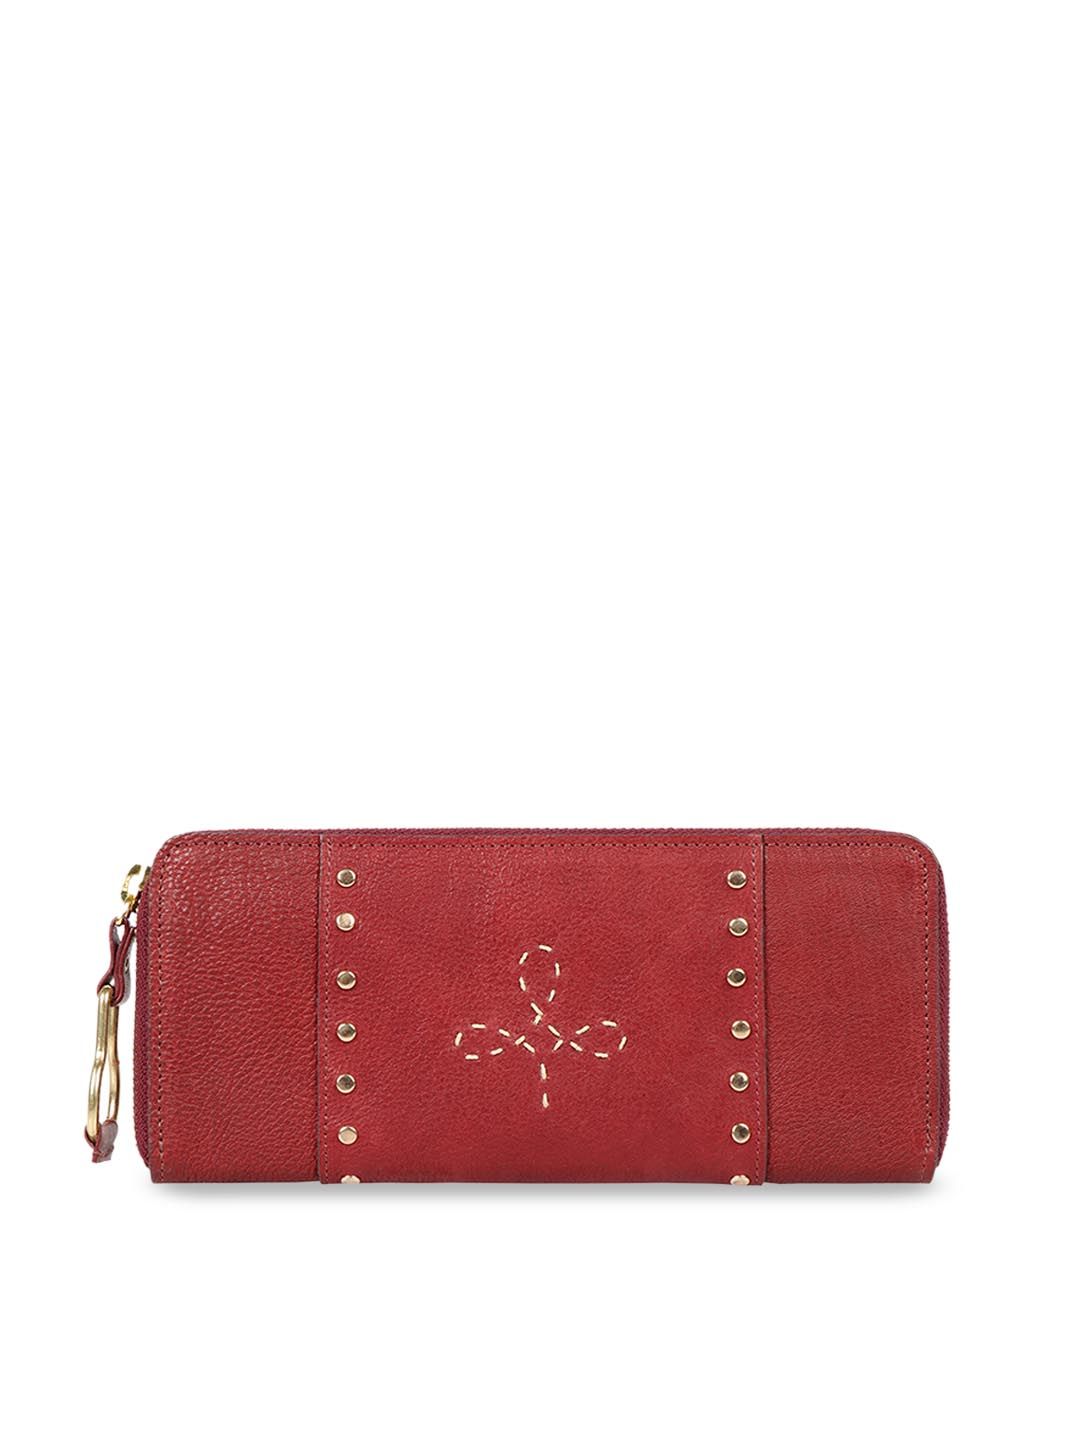 Hidesign Women Red Solid Leather Zip Around Wallet Price in India